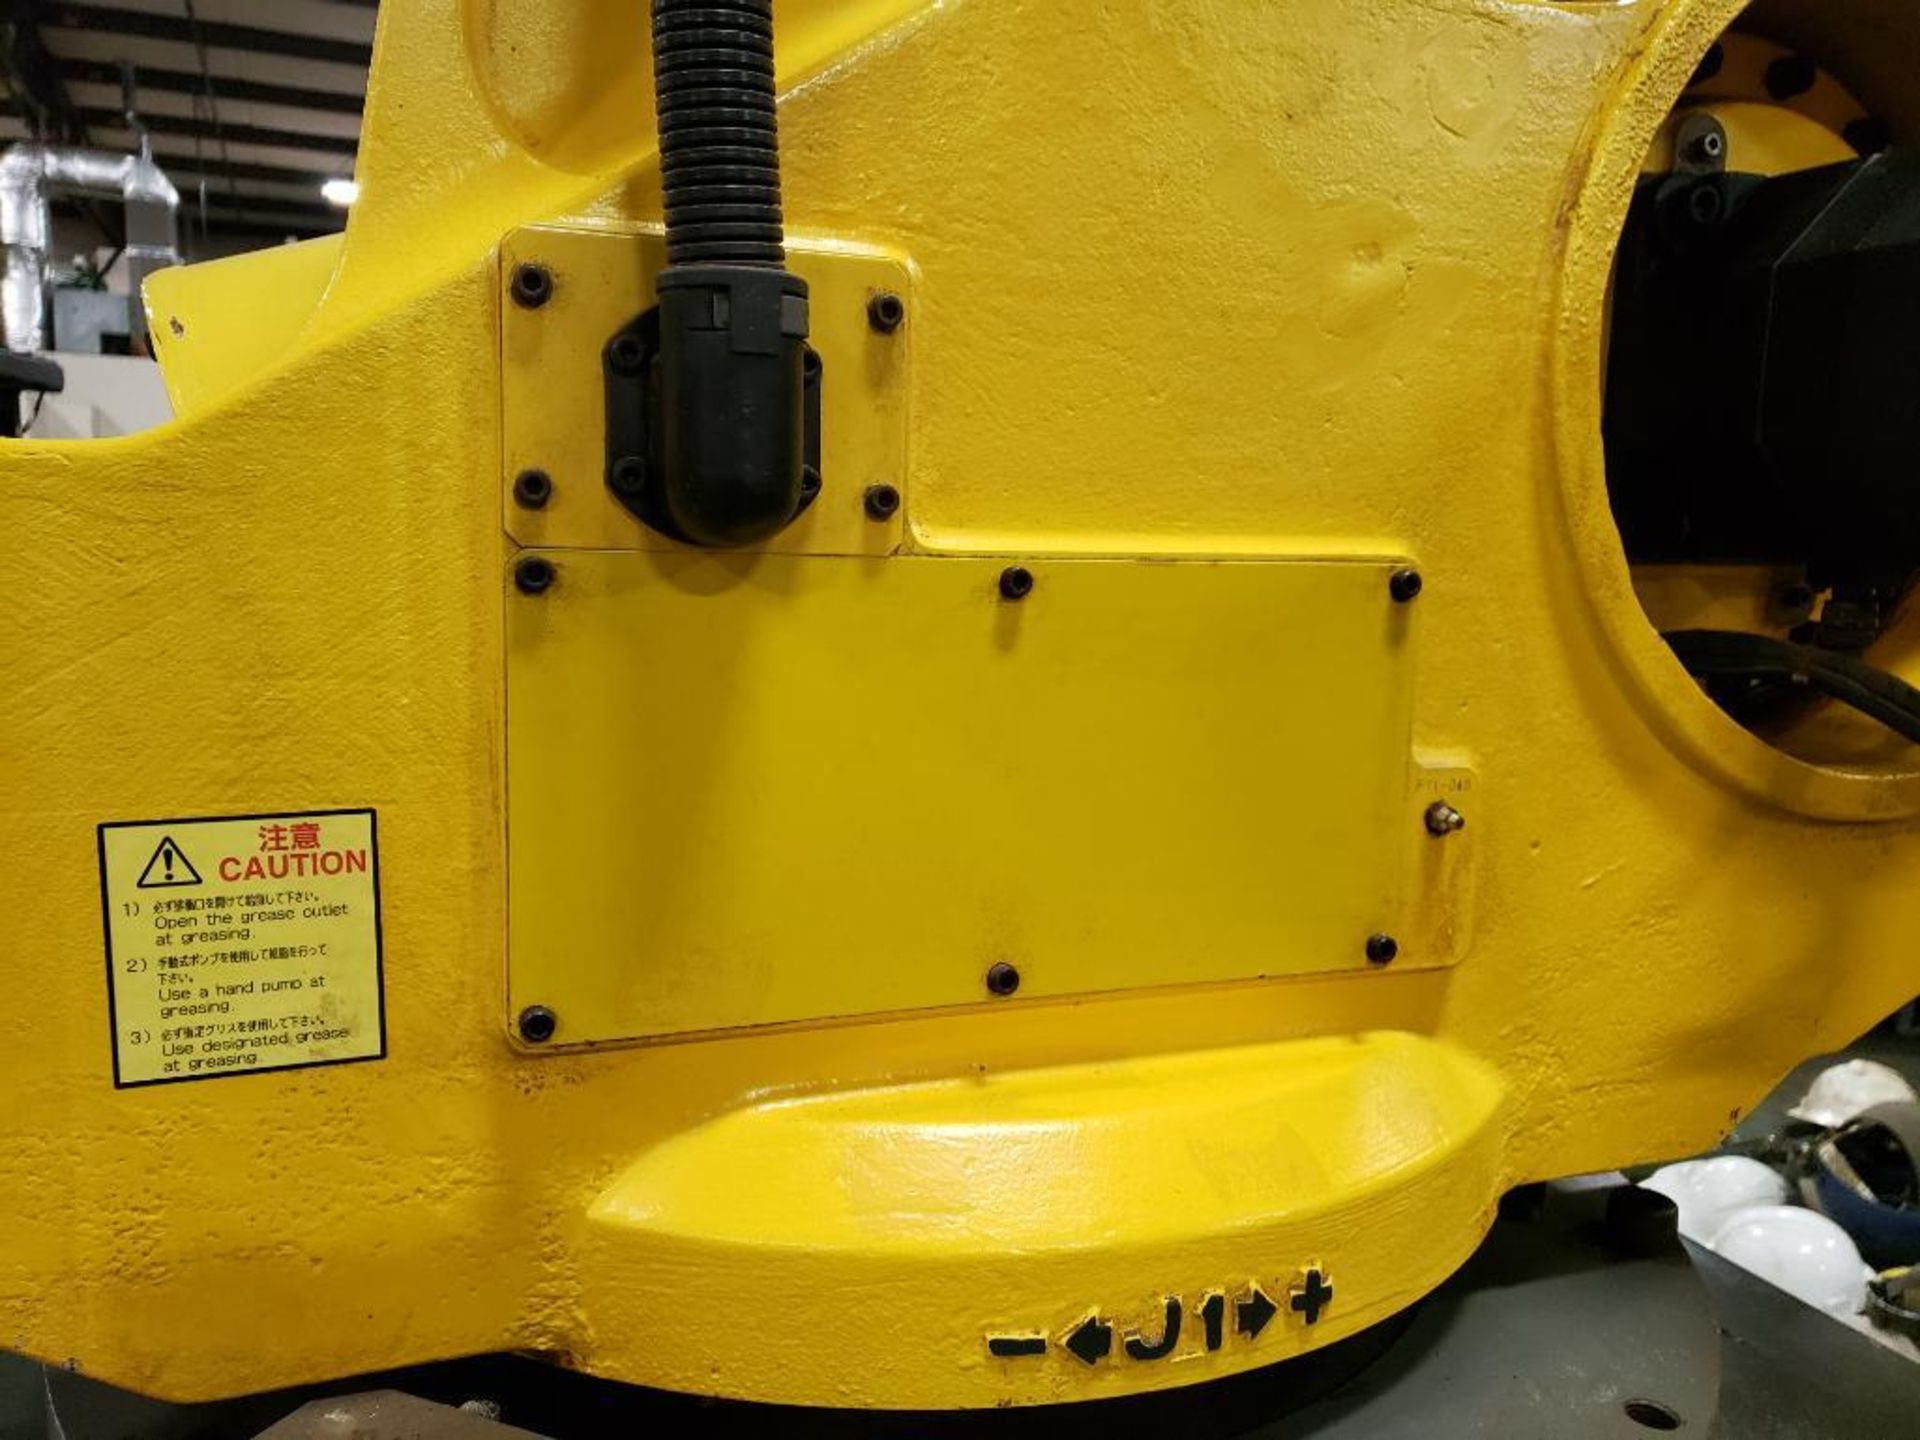 Fanuc M-410i HW robot arm. Does not include controller or cables. (cables have been cut) - Image 17 of 27